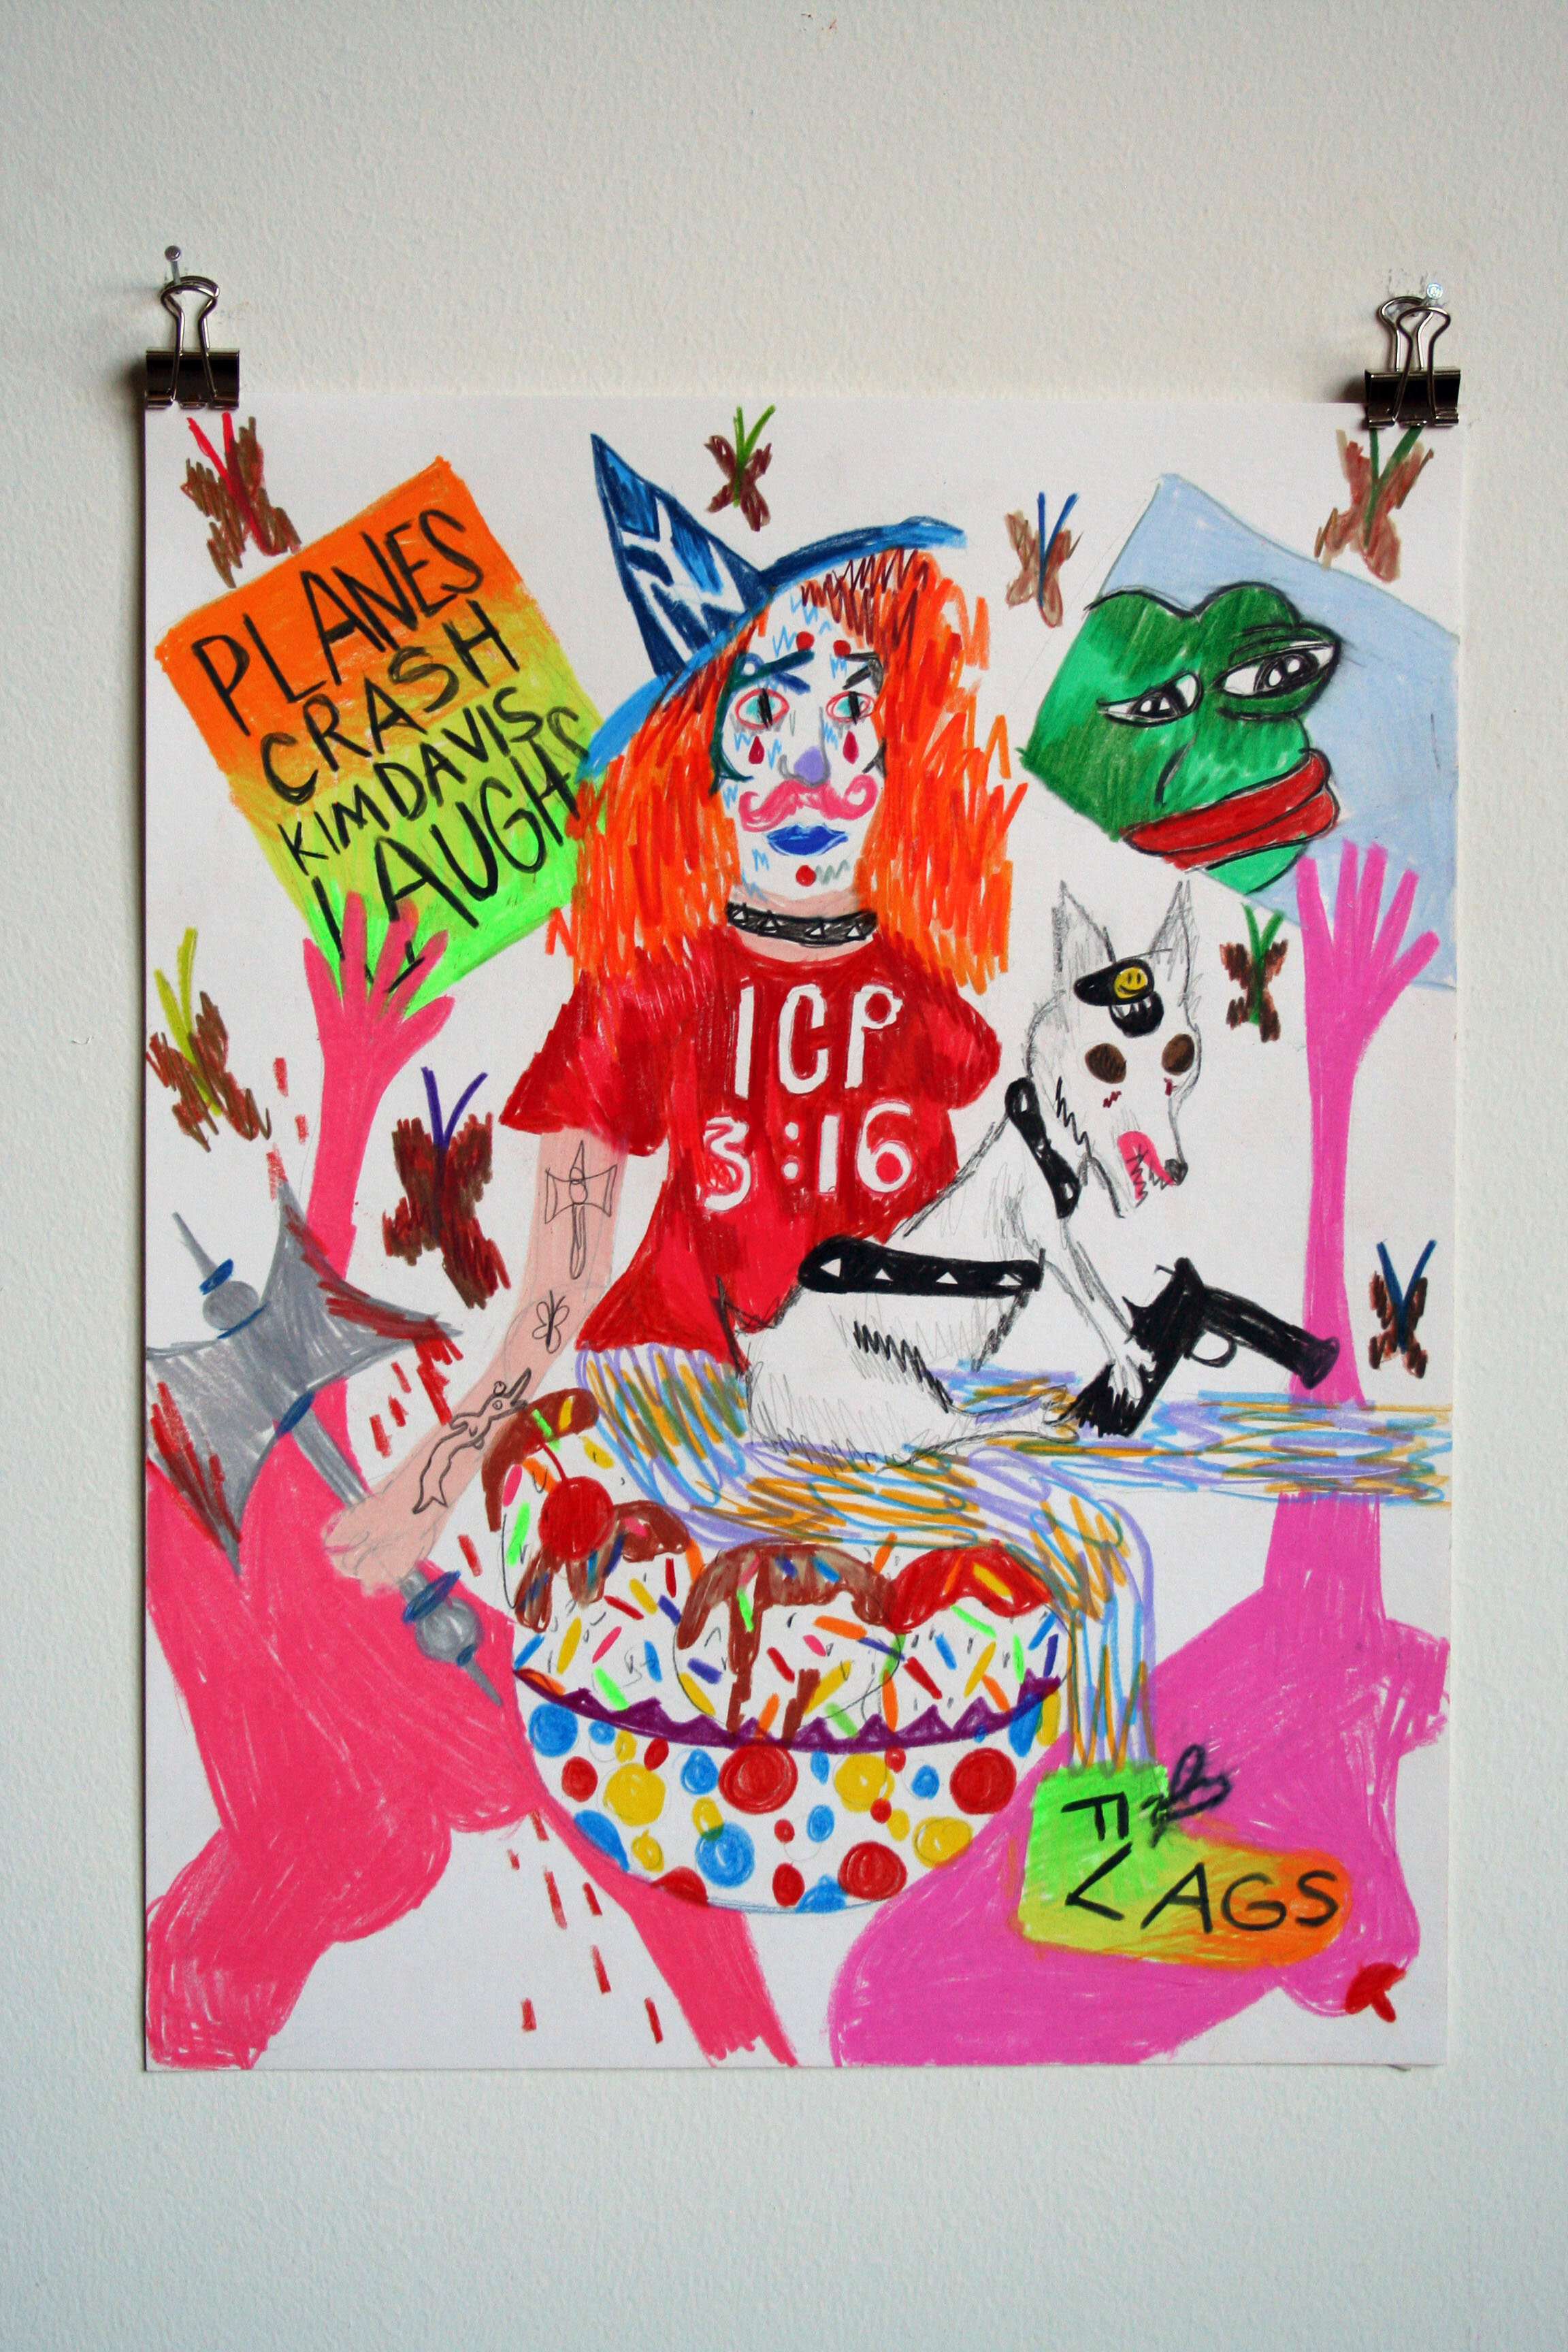   Old Put and OG Bobby Dolphin on the Sundae Throne,  2015  14 x 11 inches (35.56 x 27.94 cm.)  Colored pencil on paper 